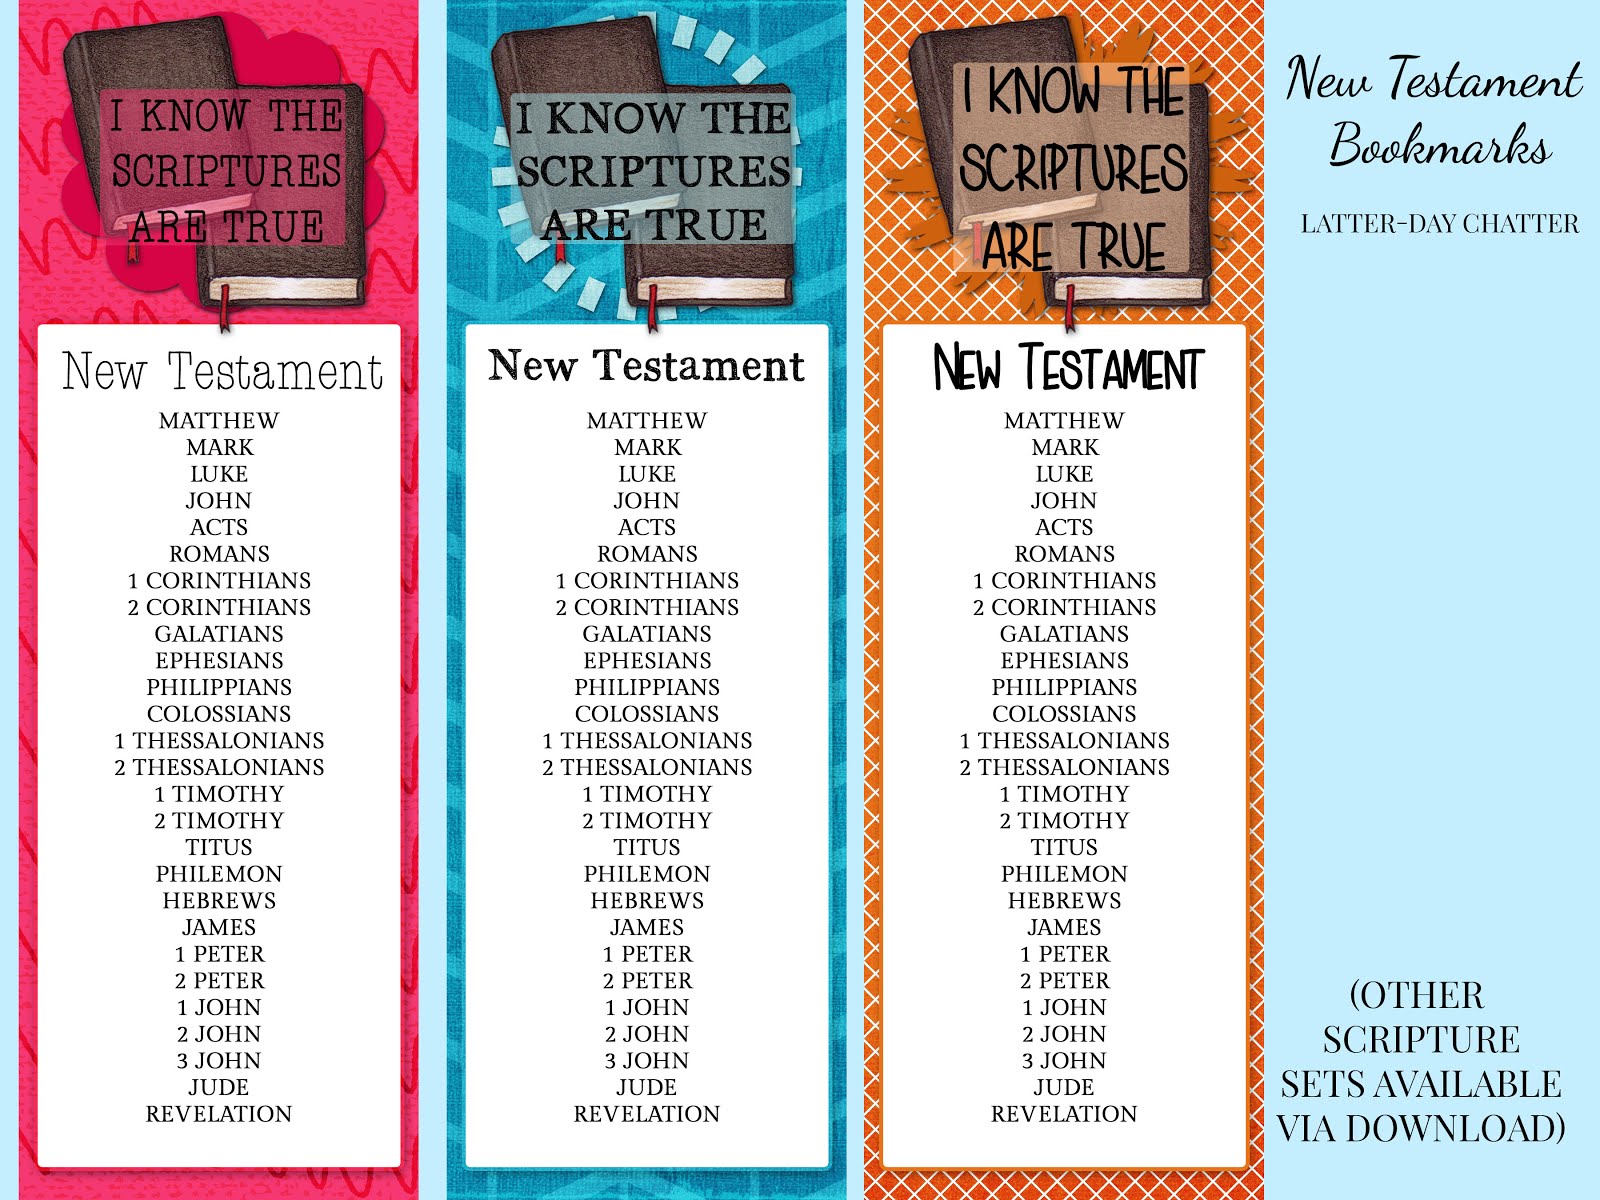 books-of-the-bible-new-testament-bookmark-bible-school-crafts-bible